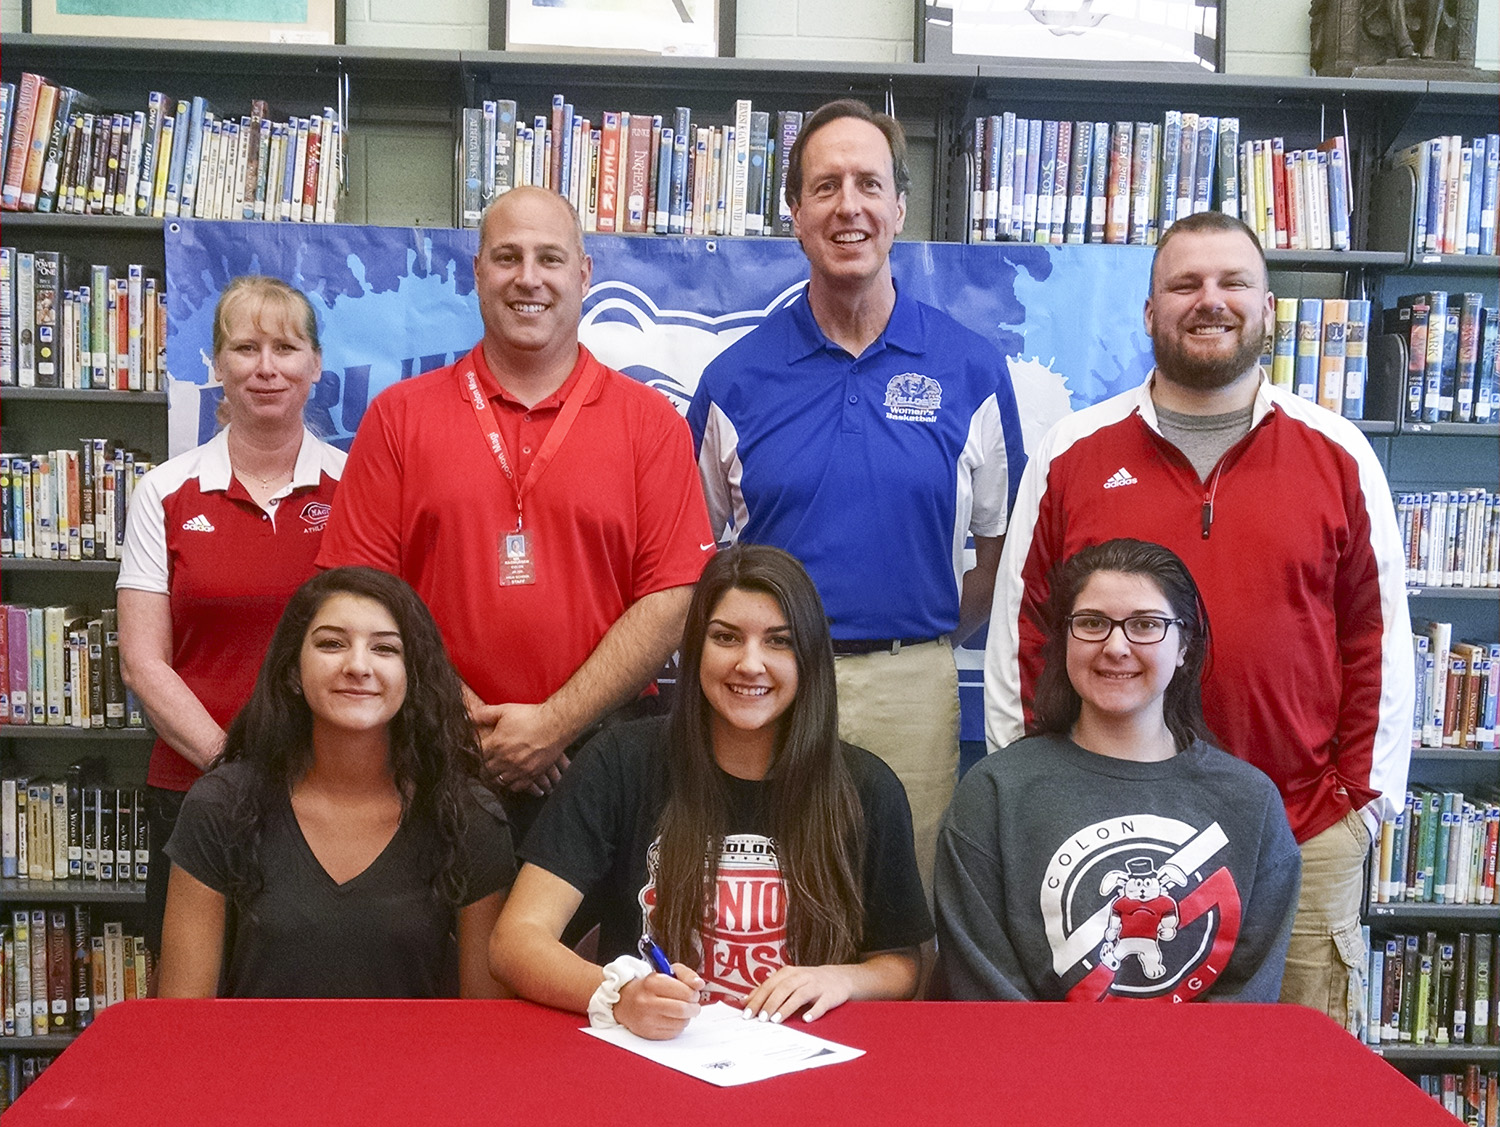 Pictured in the above photo, in the front row, from left to right, are Grace Smith (sister), Lyndsay Smith and Allyah Smith (sister). In the back row, from left to right, are Colon Junior/Senior High School Athletic Director Paige Smolarz, Colon Junior/Senior High School Principal Mike Rasmussen, KCC’s Head Women’s Basketball Coach Dic Doumanian and Colon’s Varsity Girls Basketball Coach Robbie Hattan.